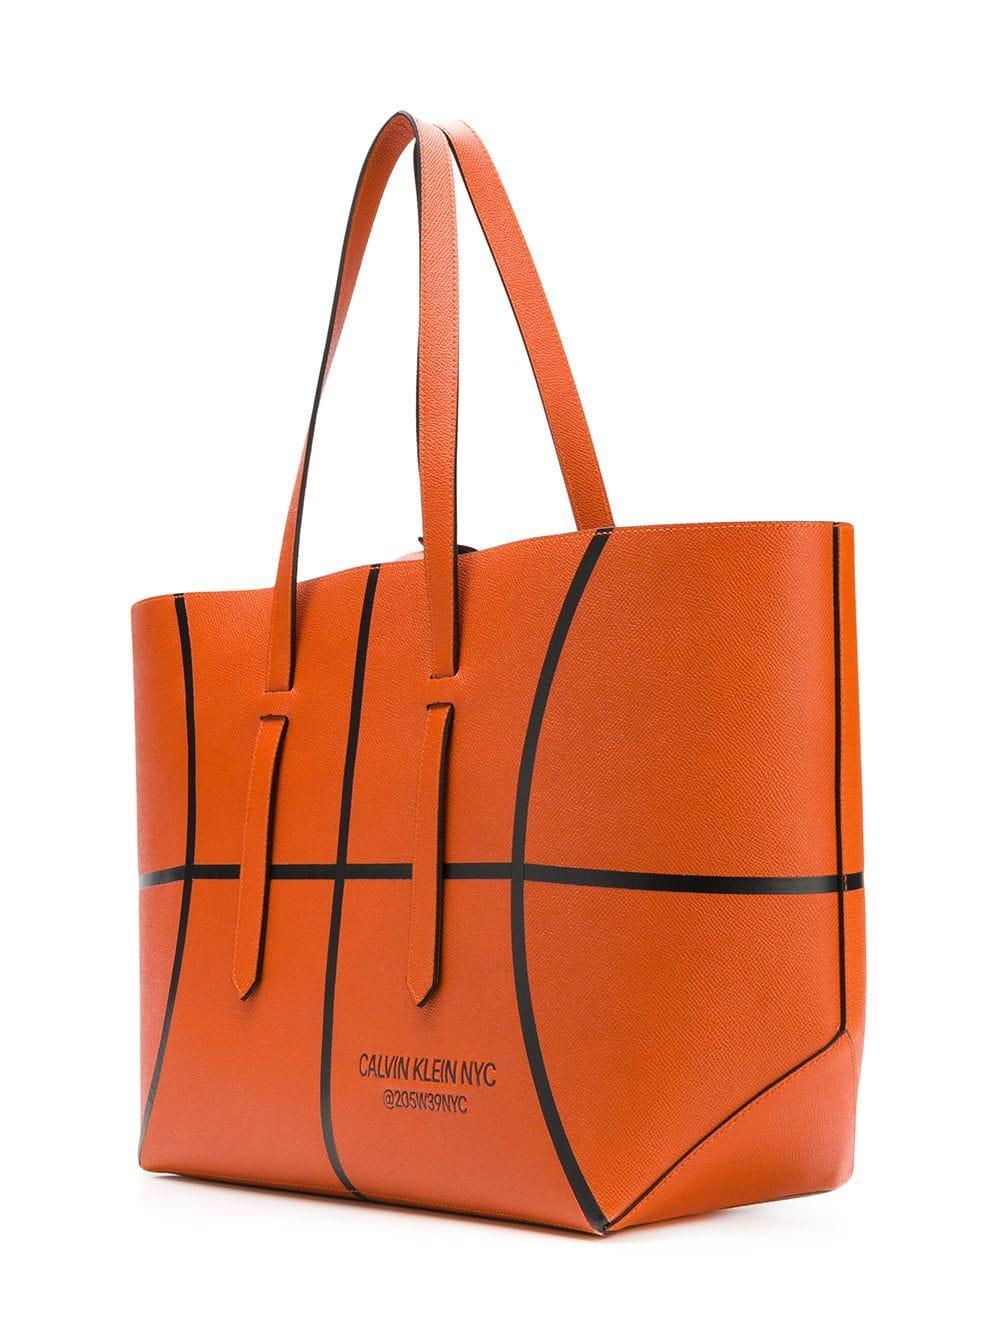 CALVIN KLEIN 205W39NYC Leather Basketball Ball Tote Bag in Orange | Lyst